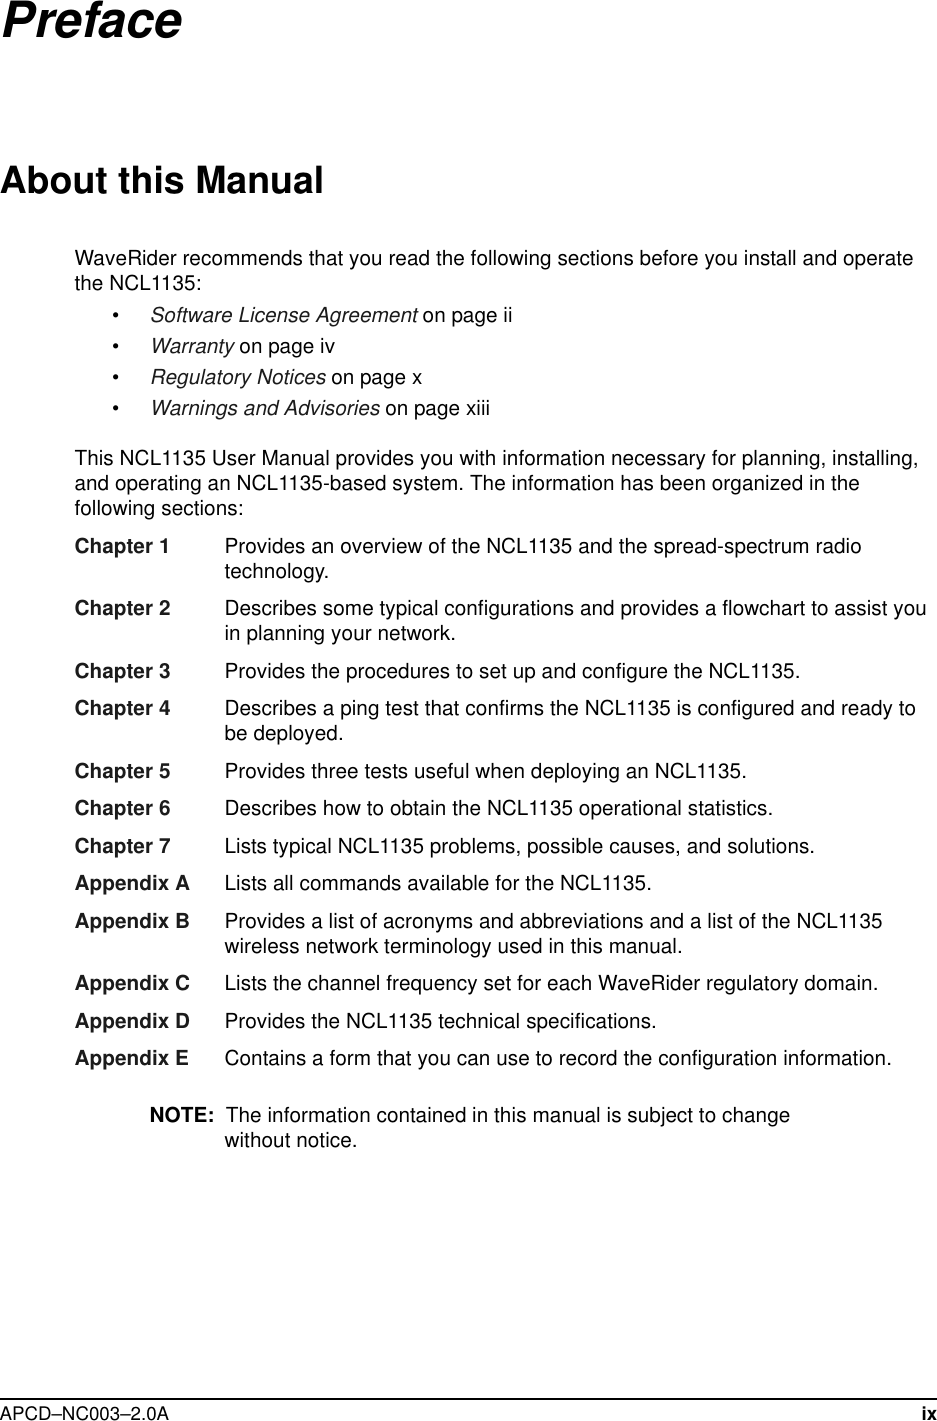  APCD–NC003–2.0A ixPrefaceAbout this ManualWaveRider recommends that you read the following sections before you install and operate the NCL1135:•Software License Agreement on page ii•Warranty on page iv•Regulatory Notices on page x•Warnings and Advisories on page xiiiThis NCL1135 User Manual provides you with information necessary for planning, installing, and operating an NCL1135-based system. The information has been organized in the following sections:Chapter 1  Provides an overview of the NCL1135 and the spread-spectrum radio technology.Chapter 2 Describes some typical configurations and provides a flowchart to assist you in planning your network.Chapter 3 Provides the procedures to set up and configure the NCL1135.Chapter 4 Describes a ping test that confirms the NCL1135 is configured and ready to be deployed.Chapter 5 Provides three tests useful when deploying an NCL1135.Chapter 6 Describes how to obtain the NCL1135 operational statistics. Chapter 7 Lists typical NCL1135 problems, possible causes, and solutions.Appendix A Lists all commands available for the NCL1135.Appendix B Provides a list of acronyms and abbreviations and a list of the NCL1135 wireless network terminology used in this manual.Appendix C Lists the channel frequency set for each WaveRider regulatory domain.Appendix D Provides the NCL1135 technical specifications.Appendix E Contains a form that you can use to record the configuration information.NOTE:  The information contained in this manual is subject to change without notice.